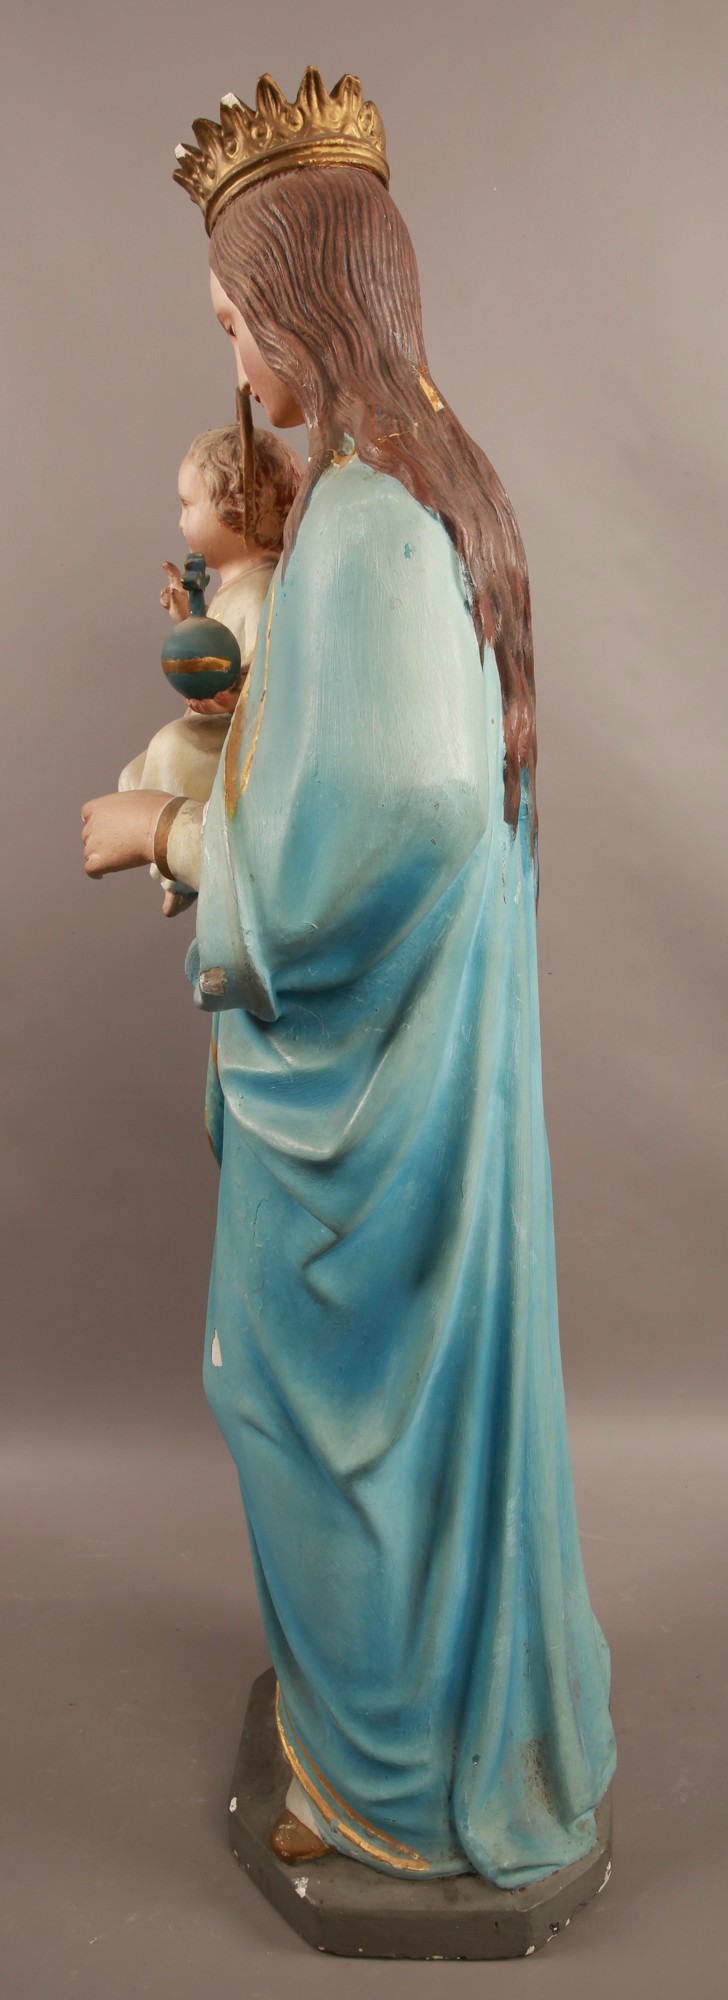 A Large Religious Statue of Mother Mary holding Baby Jesus Early 1900s 106cm Tall #92 - Image 4 of 7